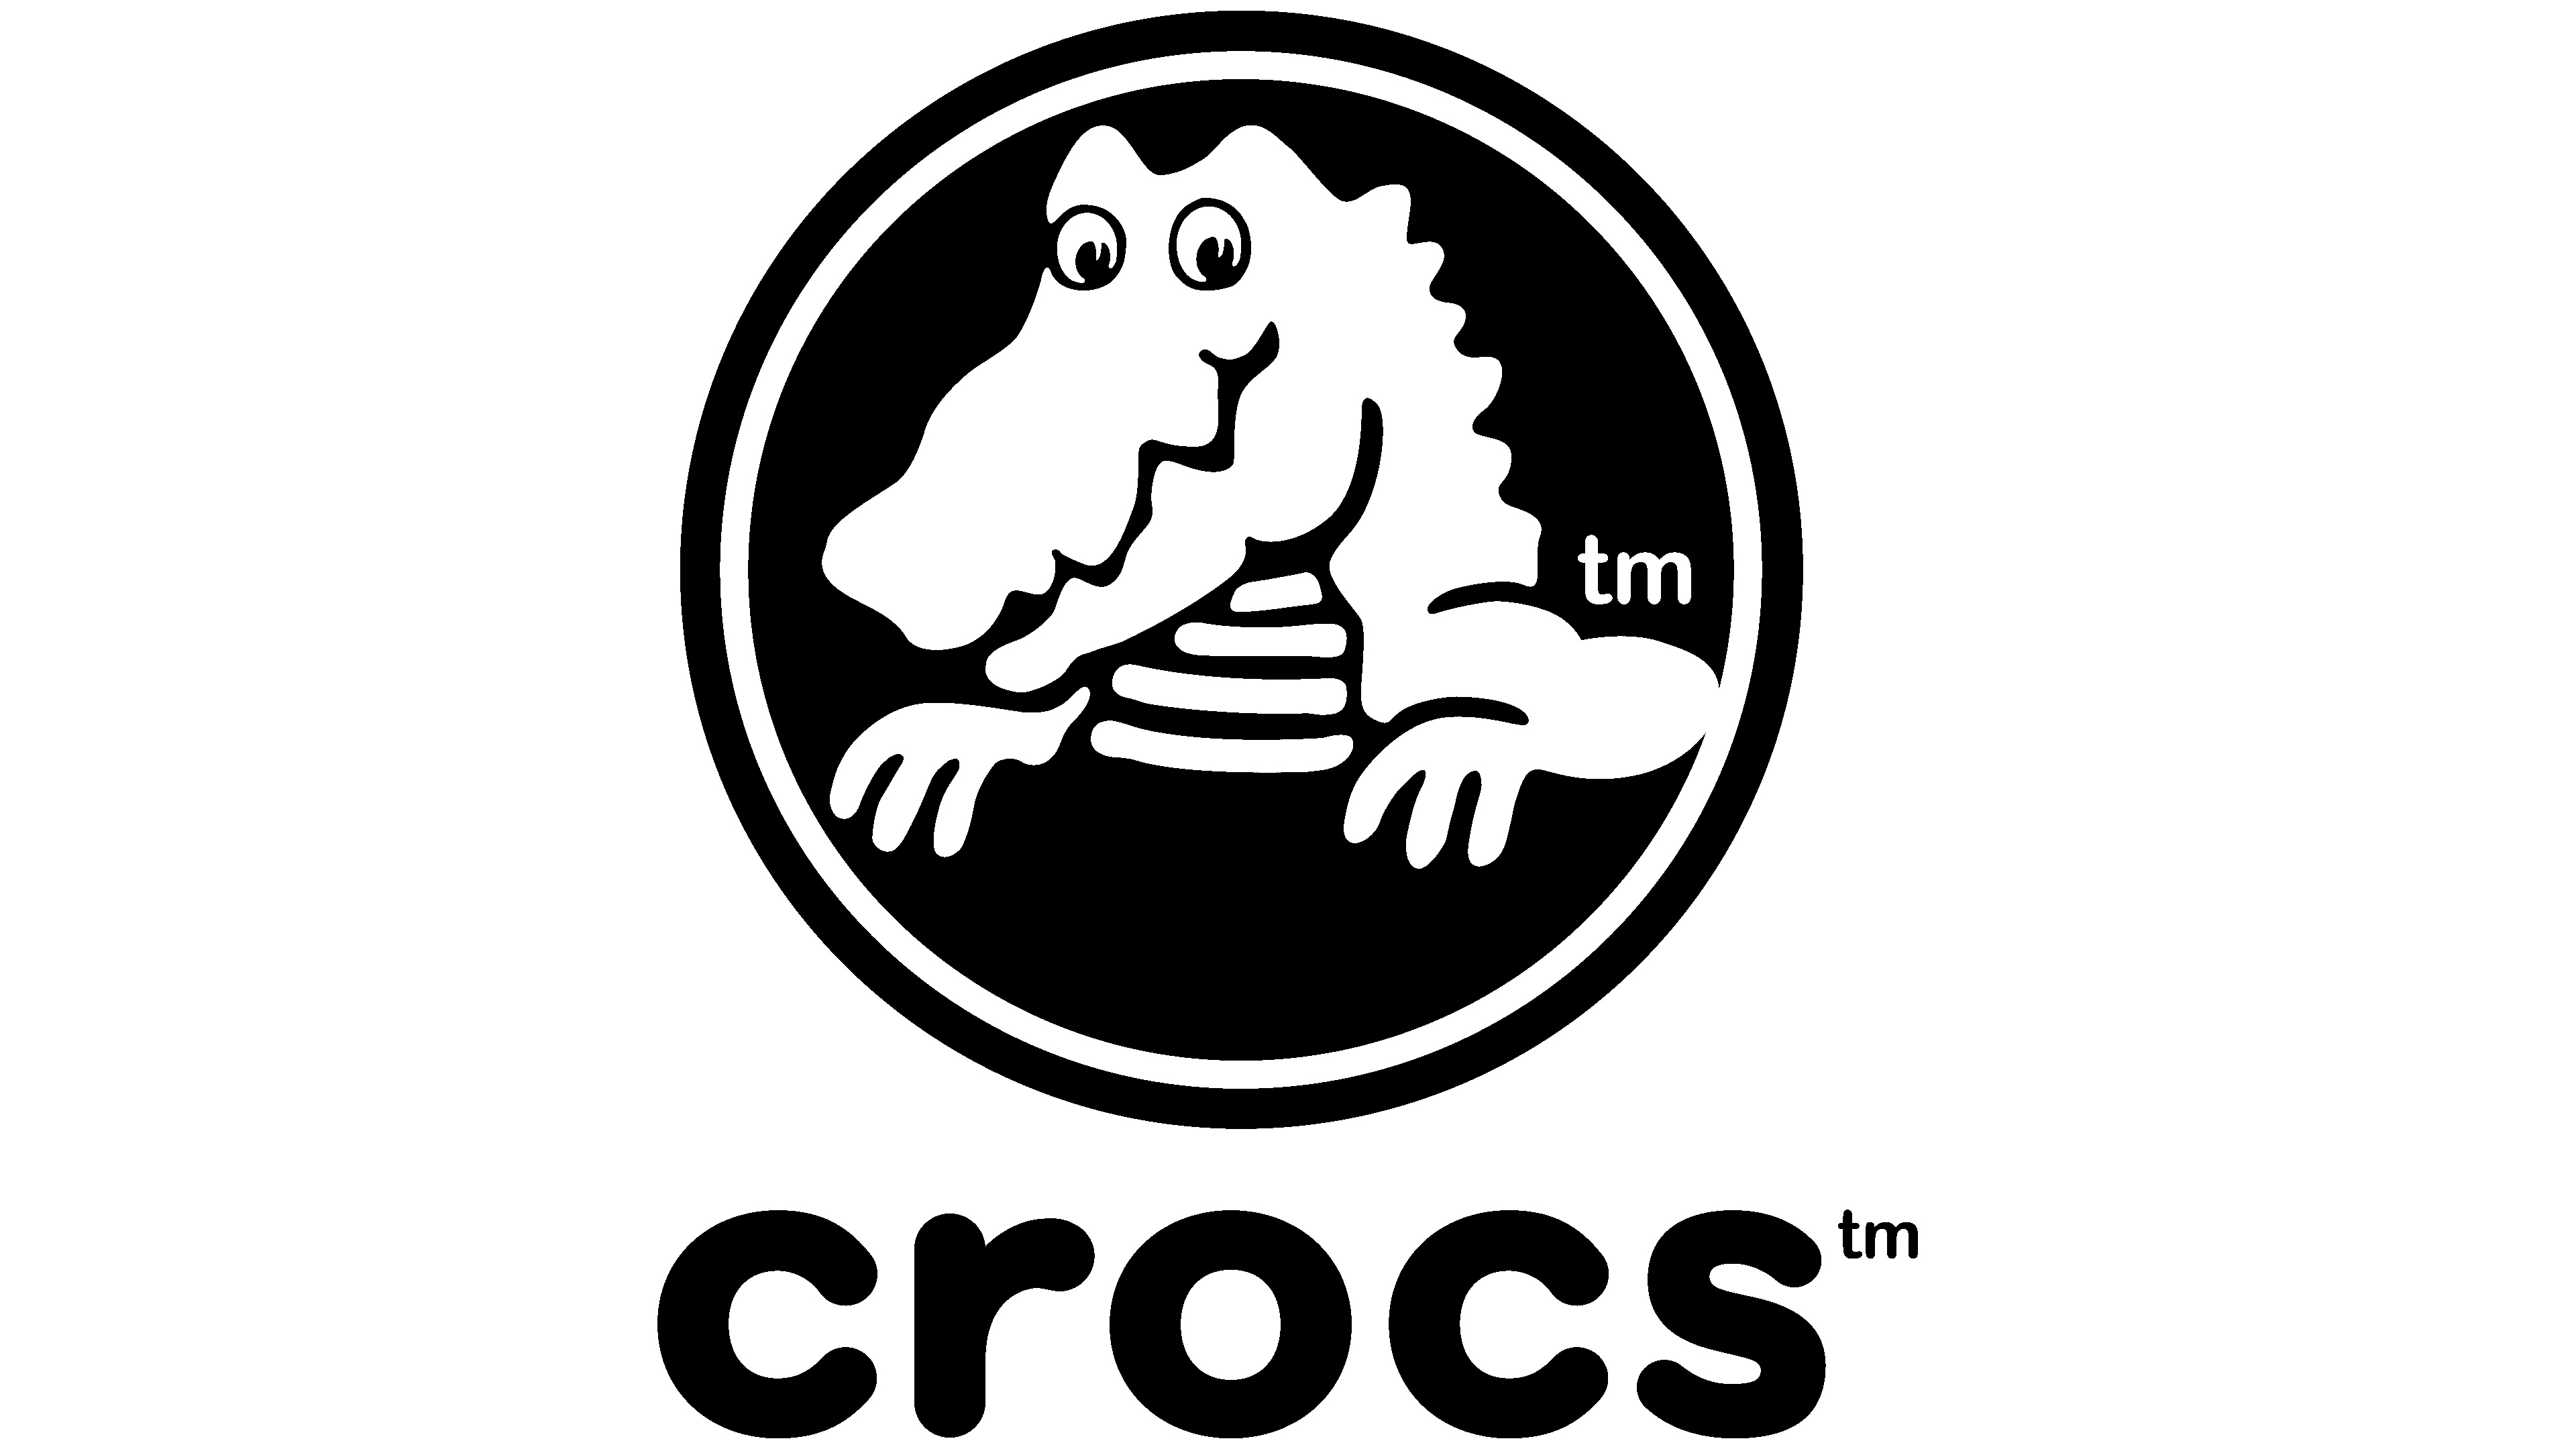 Crocs: A type of lightweight, functional shoes, Logo used since 2019. 3840x2160 4K Wallpaper.